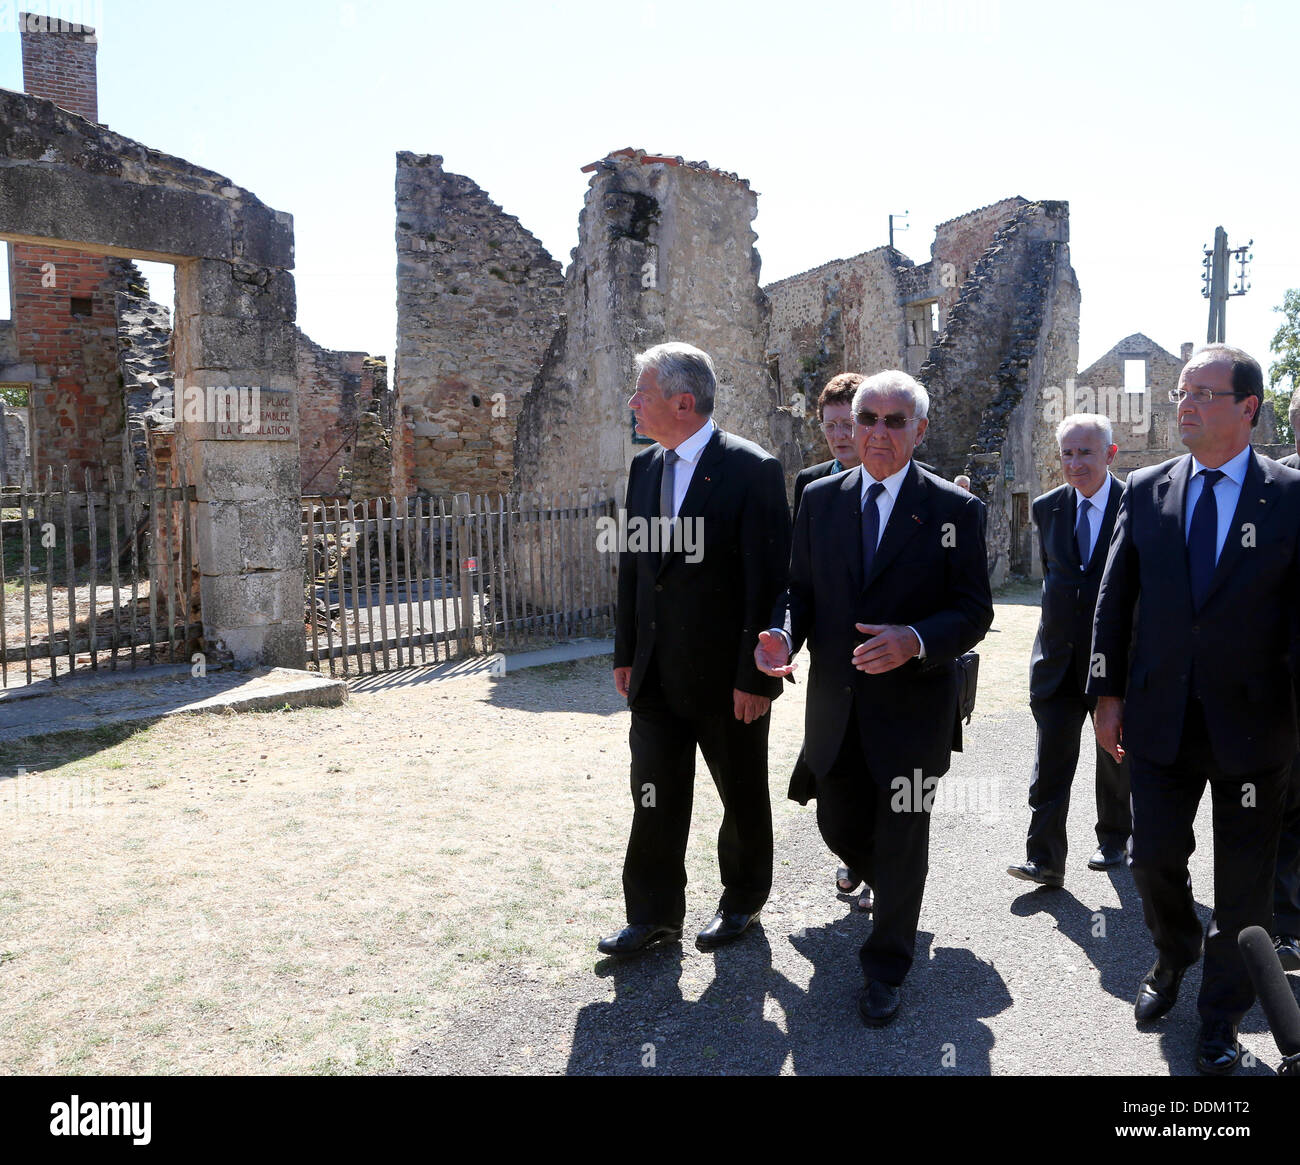 Oradour-sur-Glane, France. 04th Sep, 2013. German President Joachim Gauck (L), French President Francois Hollande (R) and survivor of the massacre in Oradour-sur-Glane during World War II Robert Hebras (2-L) are pictured at the memorial site in Oradour-sur-Glane, France, 04 September 2013. A unit of SS officers murdered 642 citizens of the town in June 1944. The German President is on a three-day visit to France. Photo: WOLFGANG KUMM/dpa/Alamy Live News Stock Photo